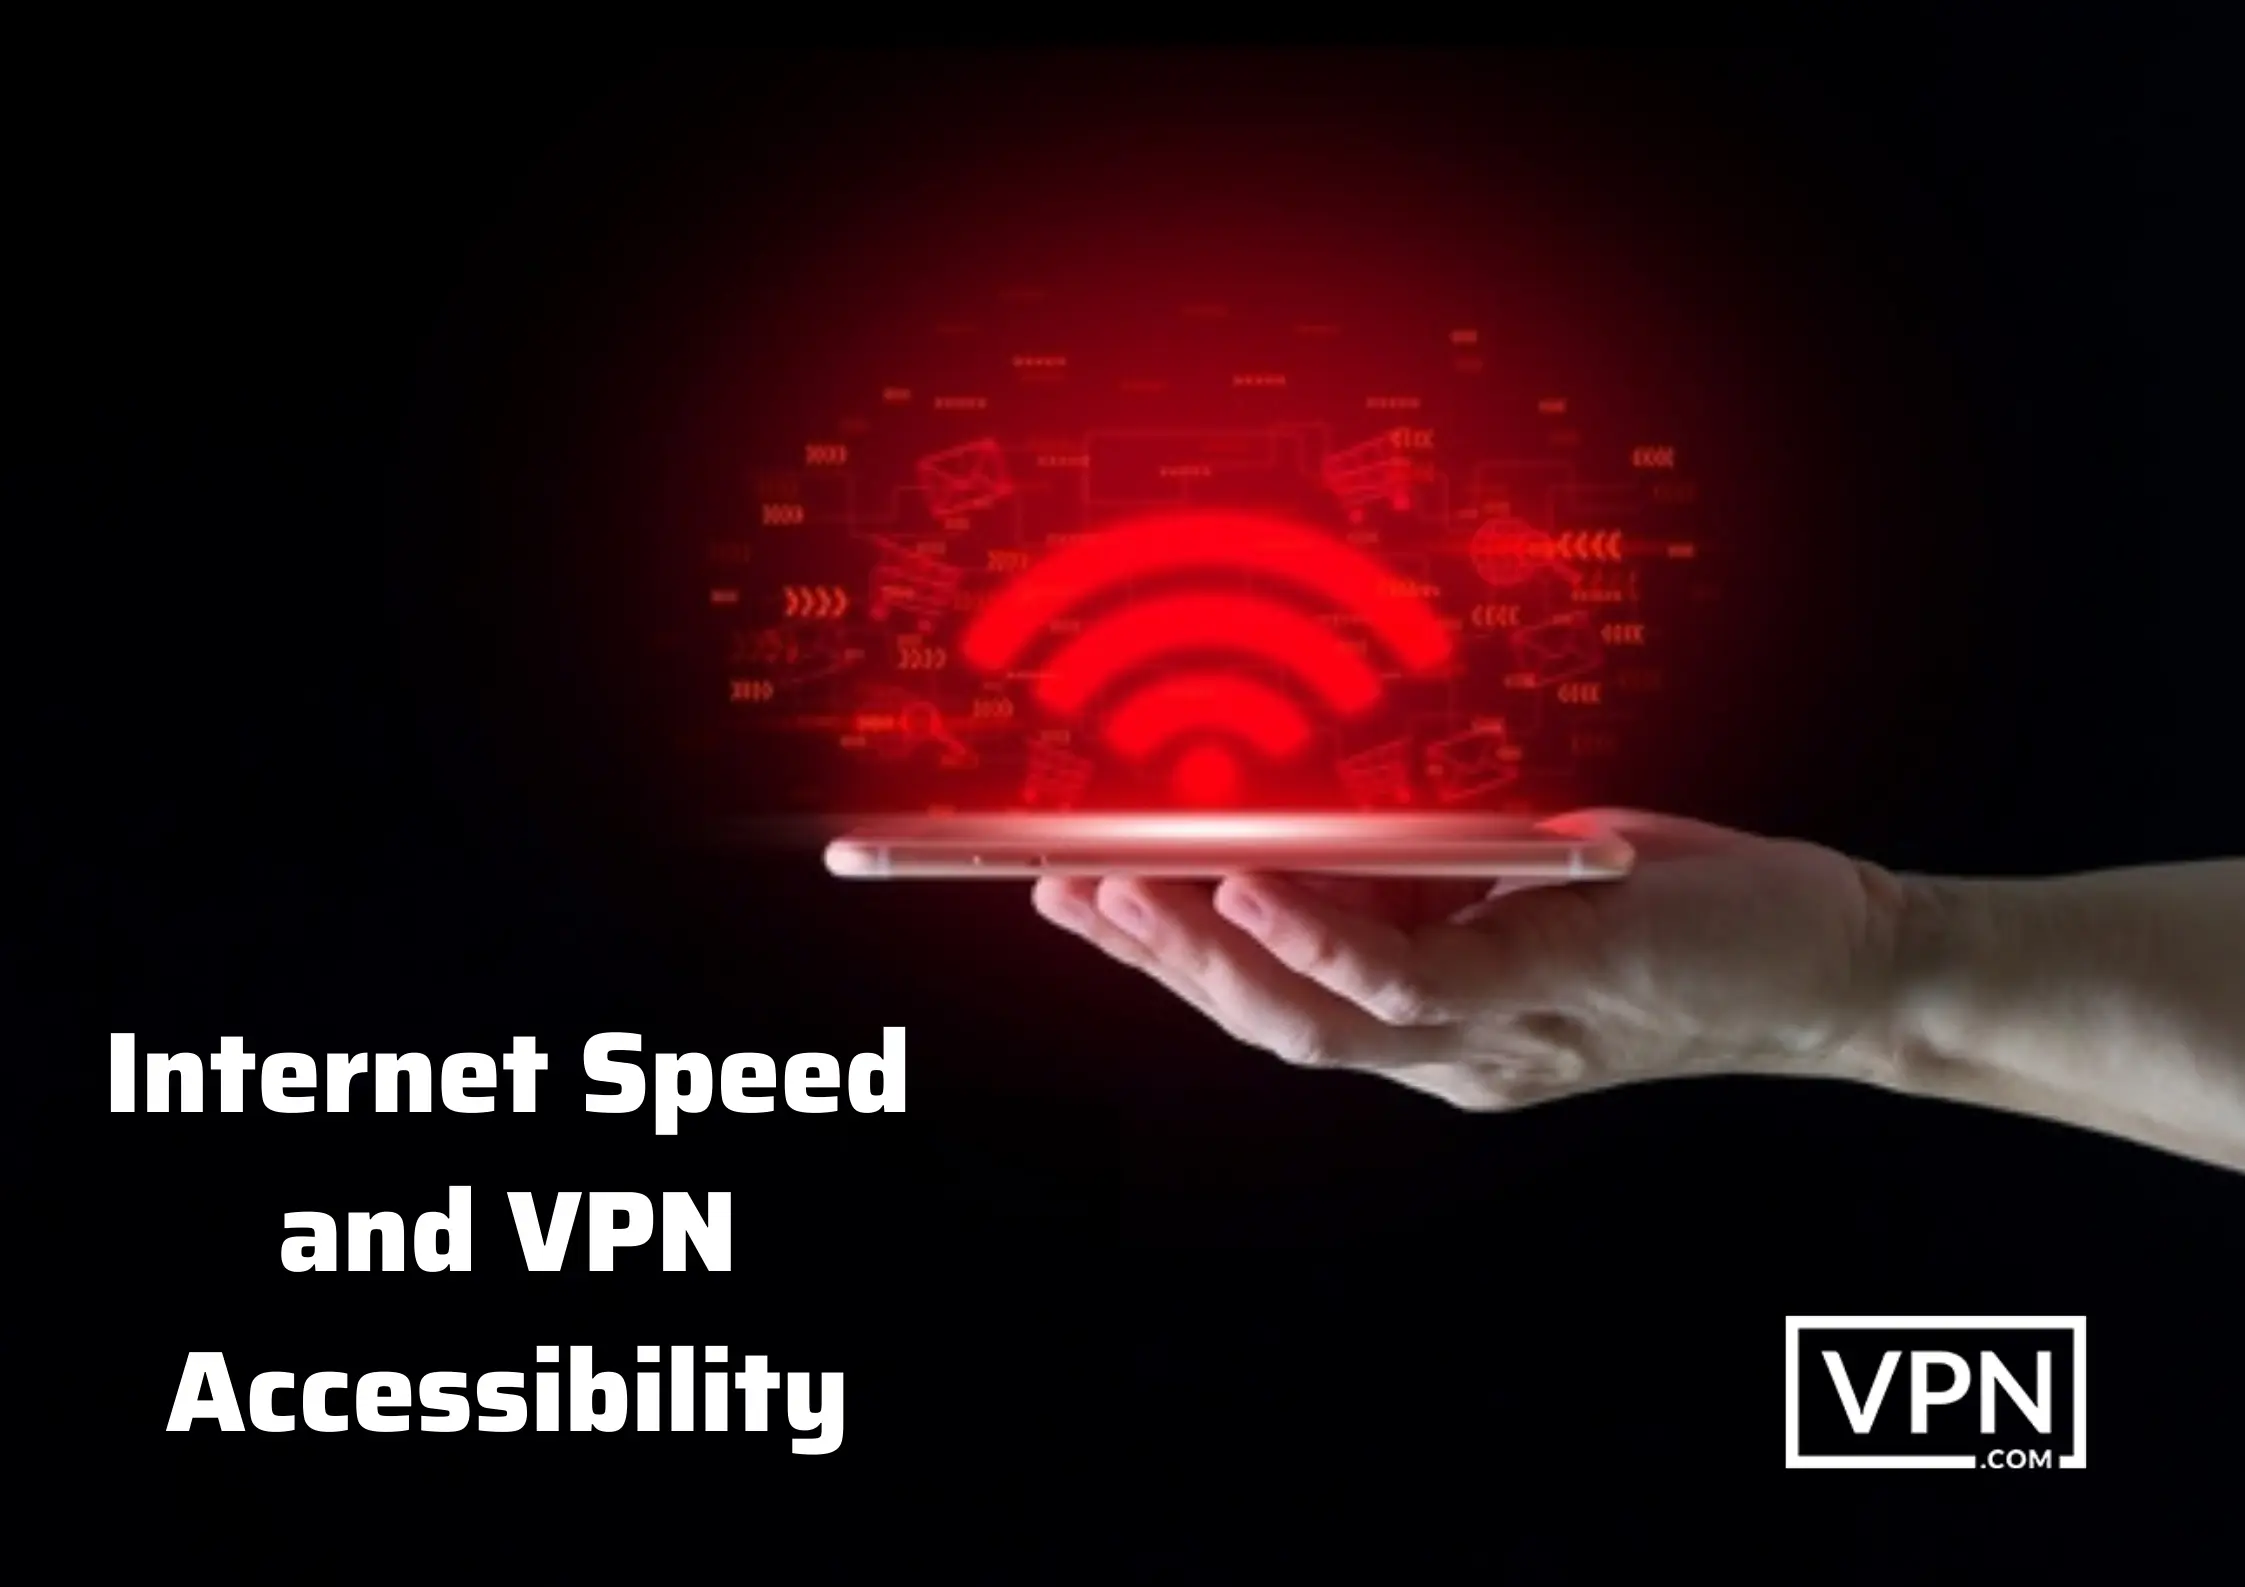 picture is showing how can you spped up internet speed and VPN accessibility whilke using VPN in morocco